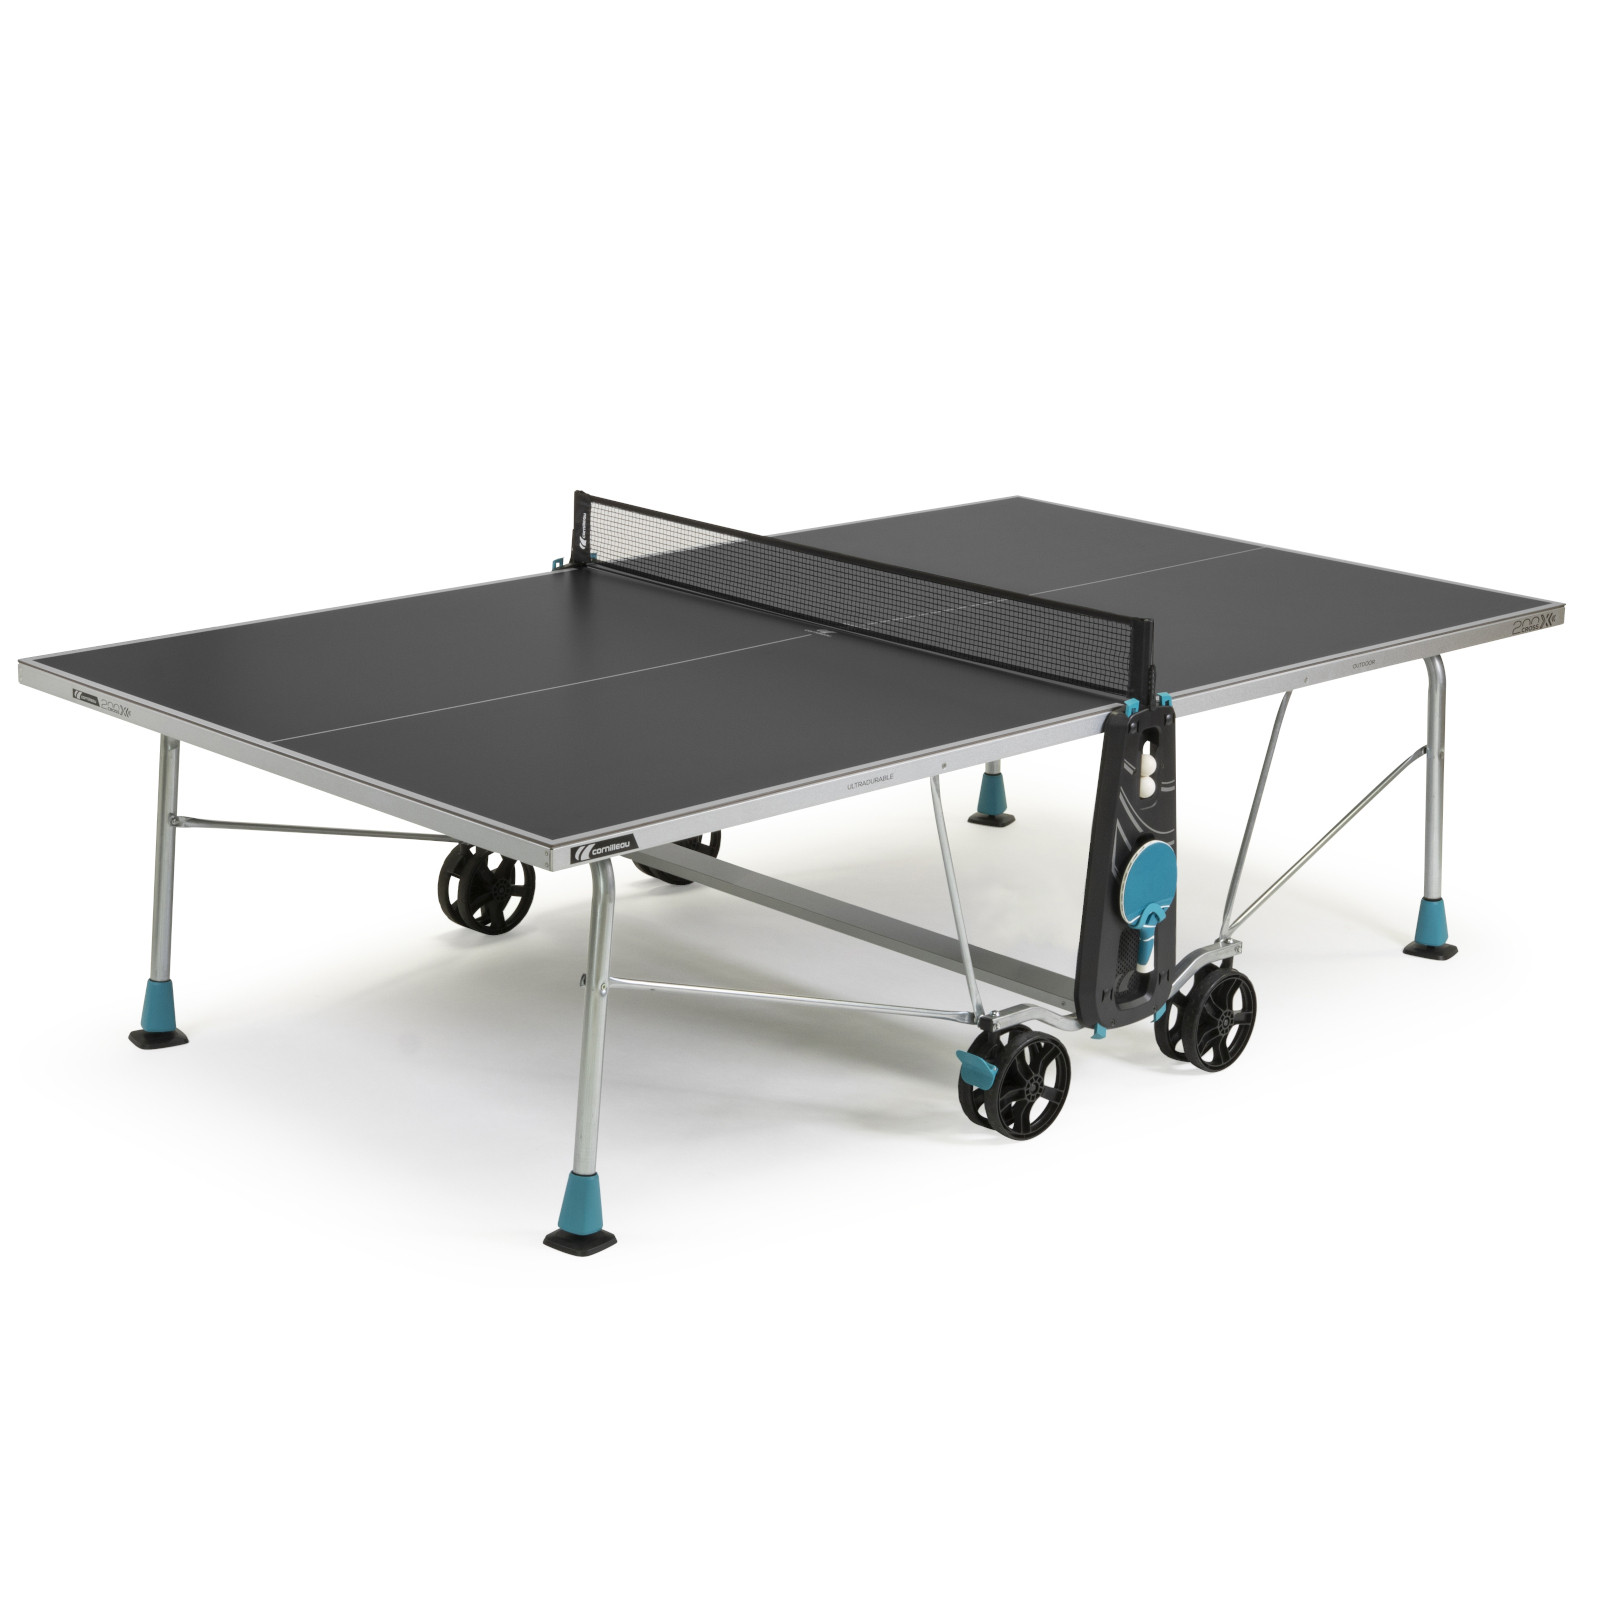 Cornilleau Sport-Tiedje with buy Outdoor Table 200X - ratings customer 14 Table Tennis